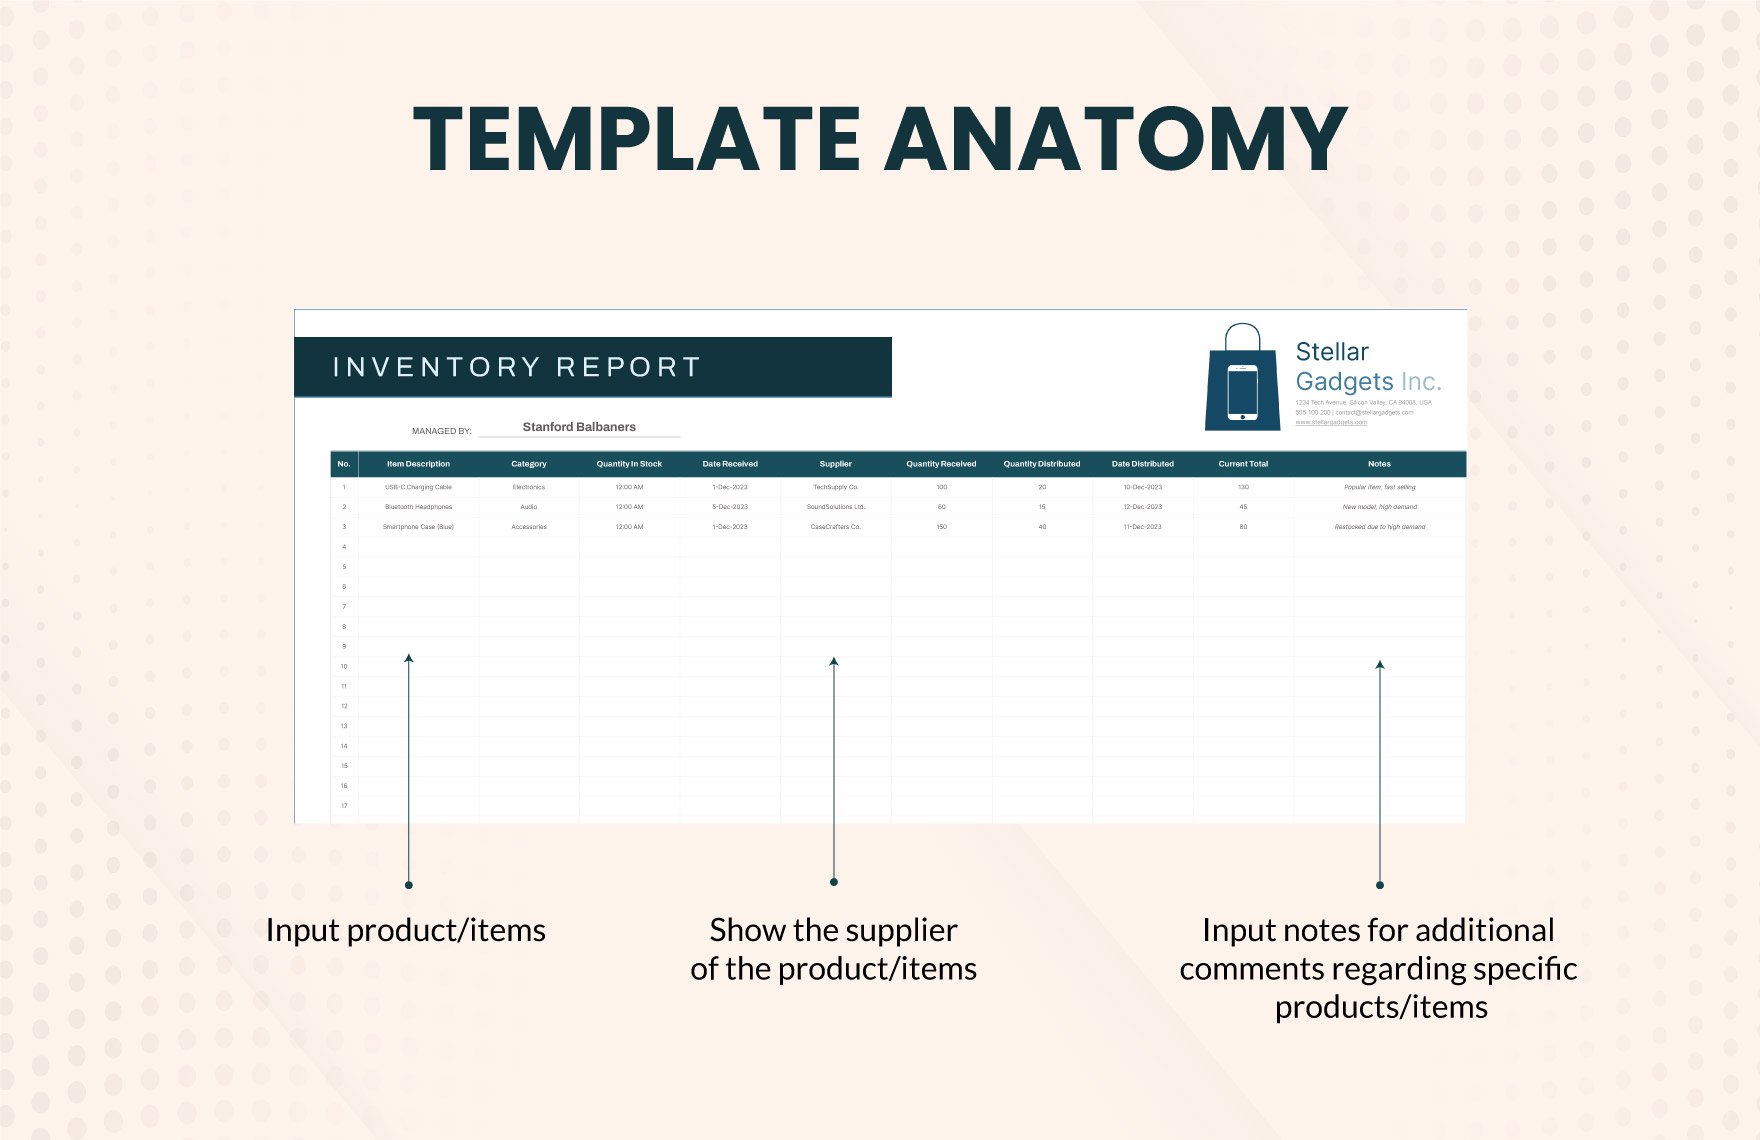 Daily Inventory Report Template